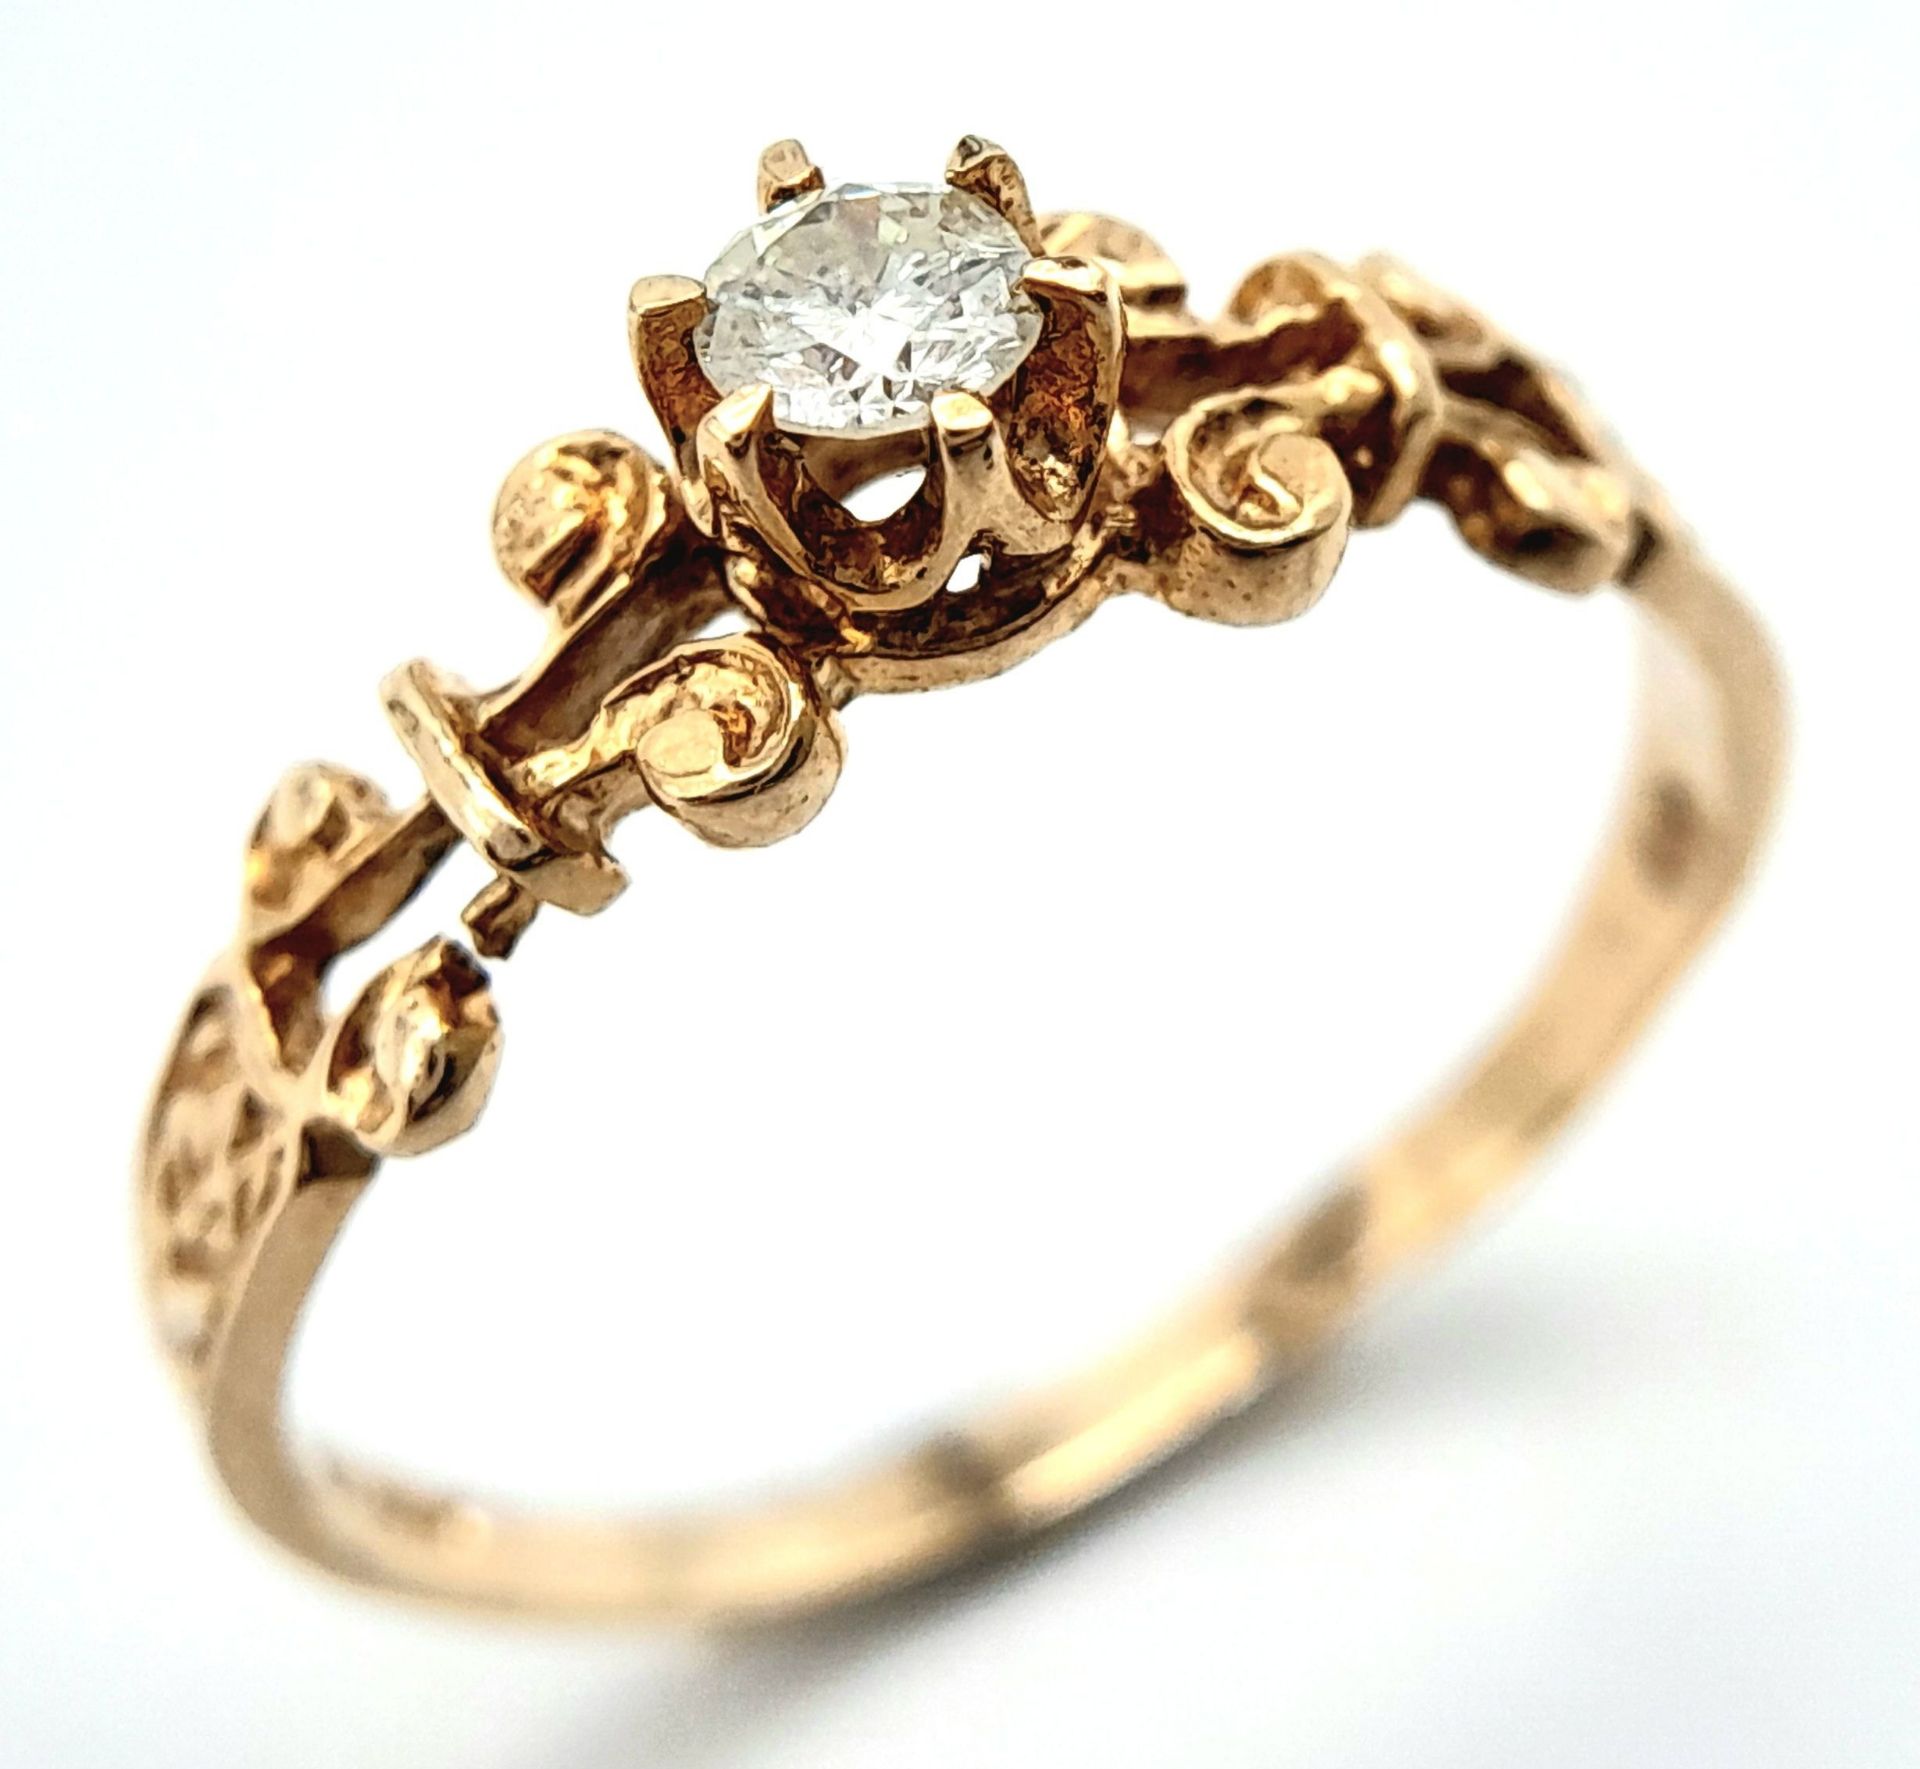 A 9K YELLOW GOLD FANCY DIAMOND SOLITAIRE RING. 0.15CT. 1.3G. SIZE N - Image 4 of 6